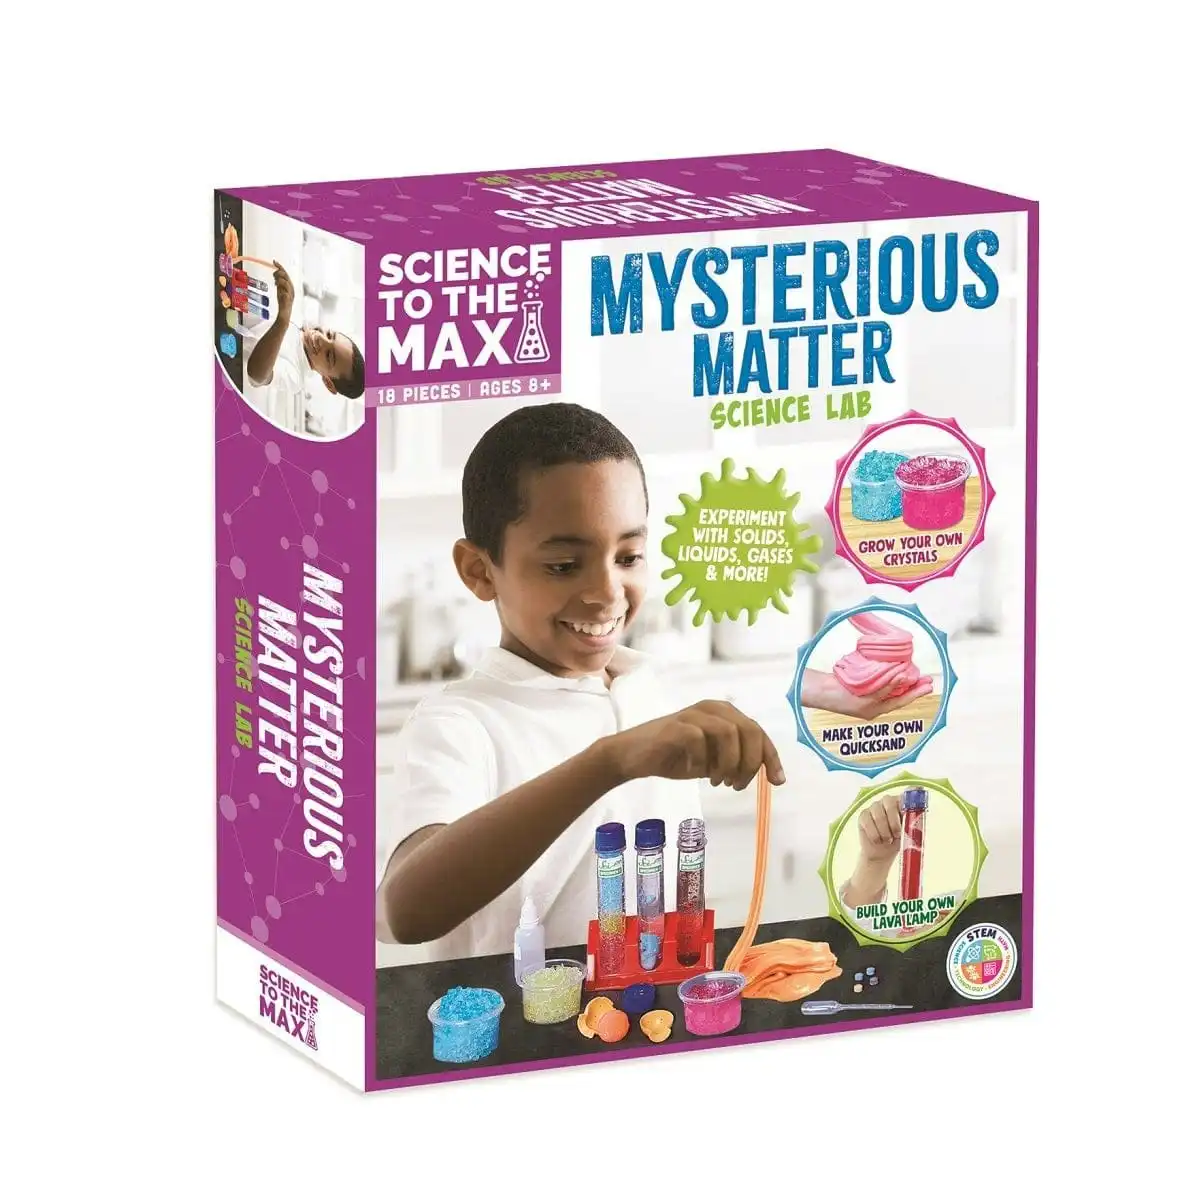 Science To The Max Mysterious Matter